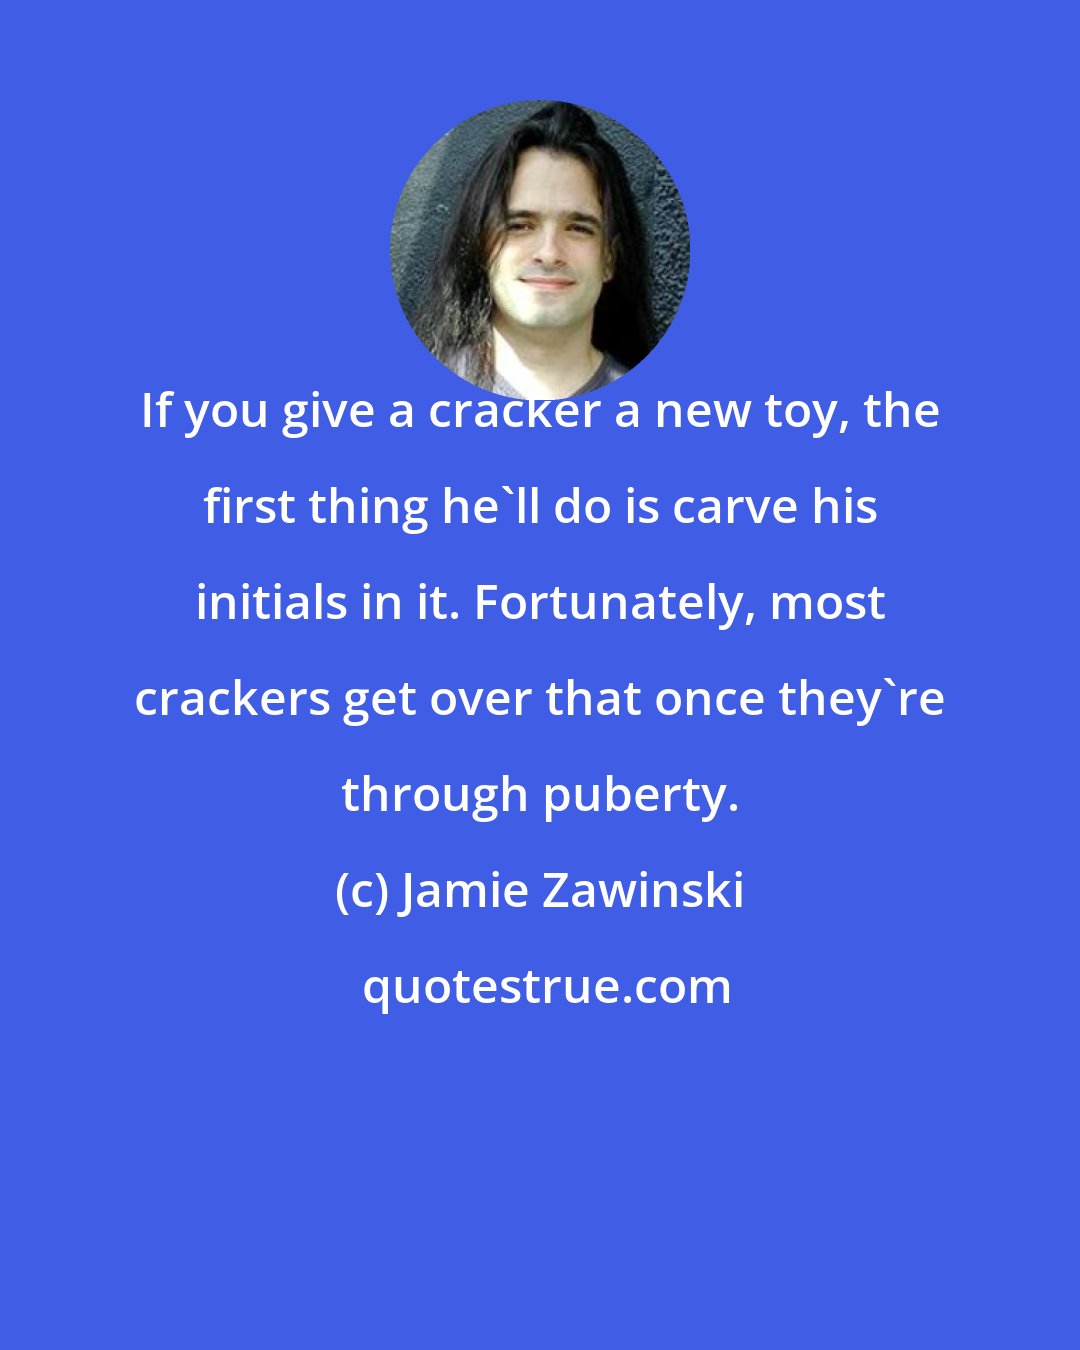 Jamie Zawinski: If you give a cracker a new toy, the first thing he'll do is carve his initials in it. Fortunately, most crackers get over that once they're through puberty.